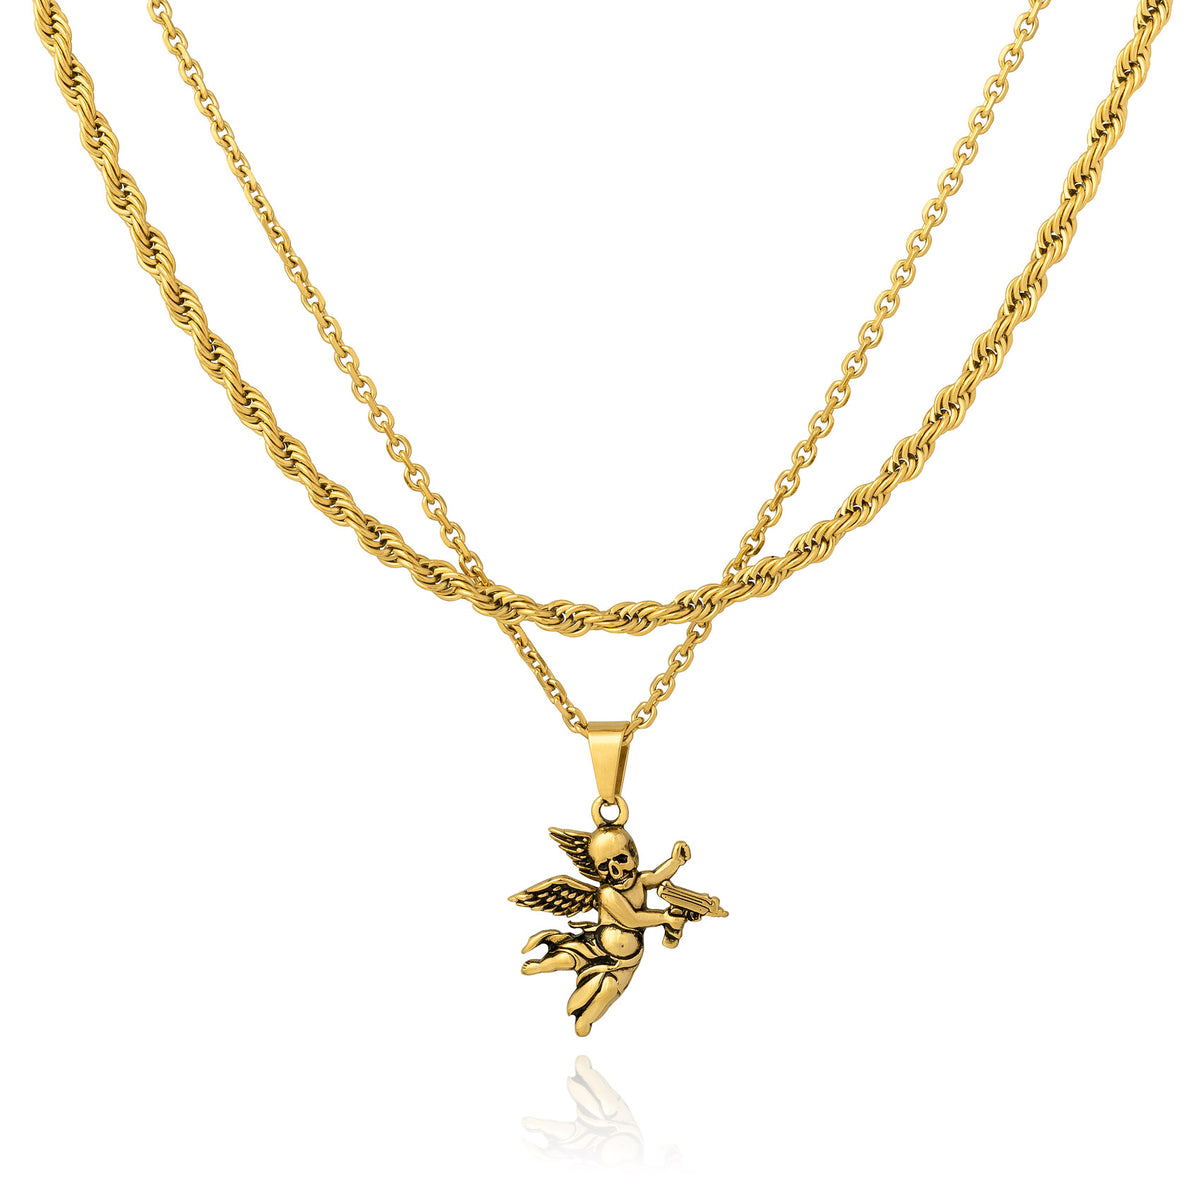 Gold Rope Chain Pendant necklace Set by statement collective 